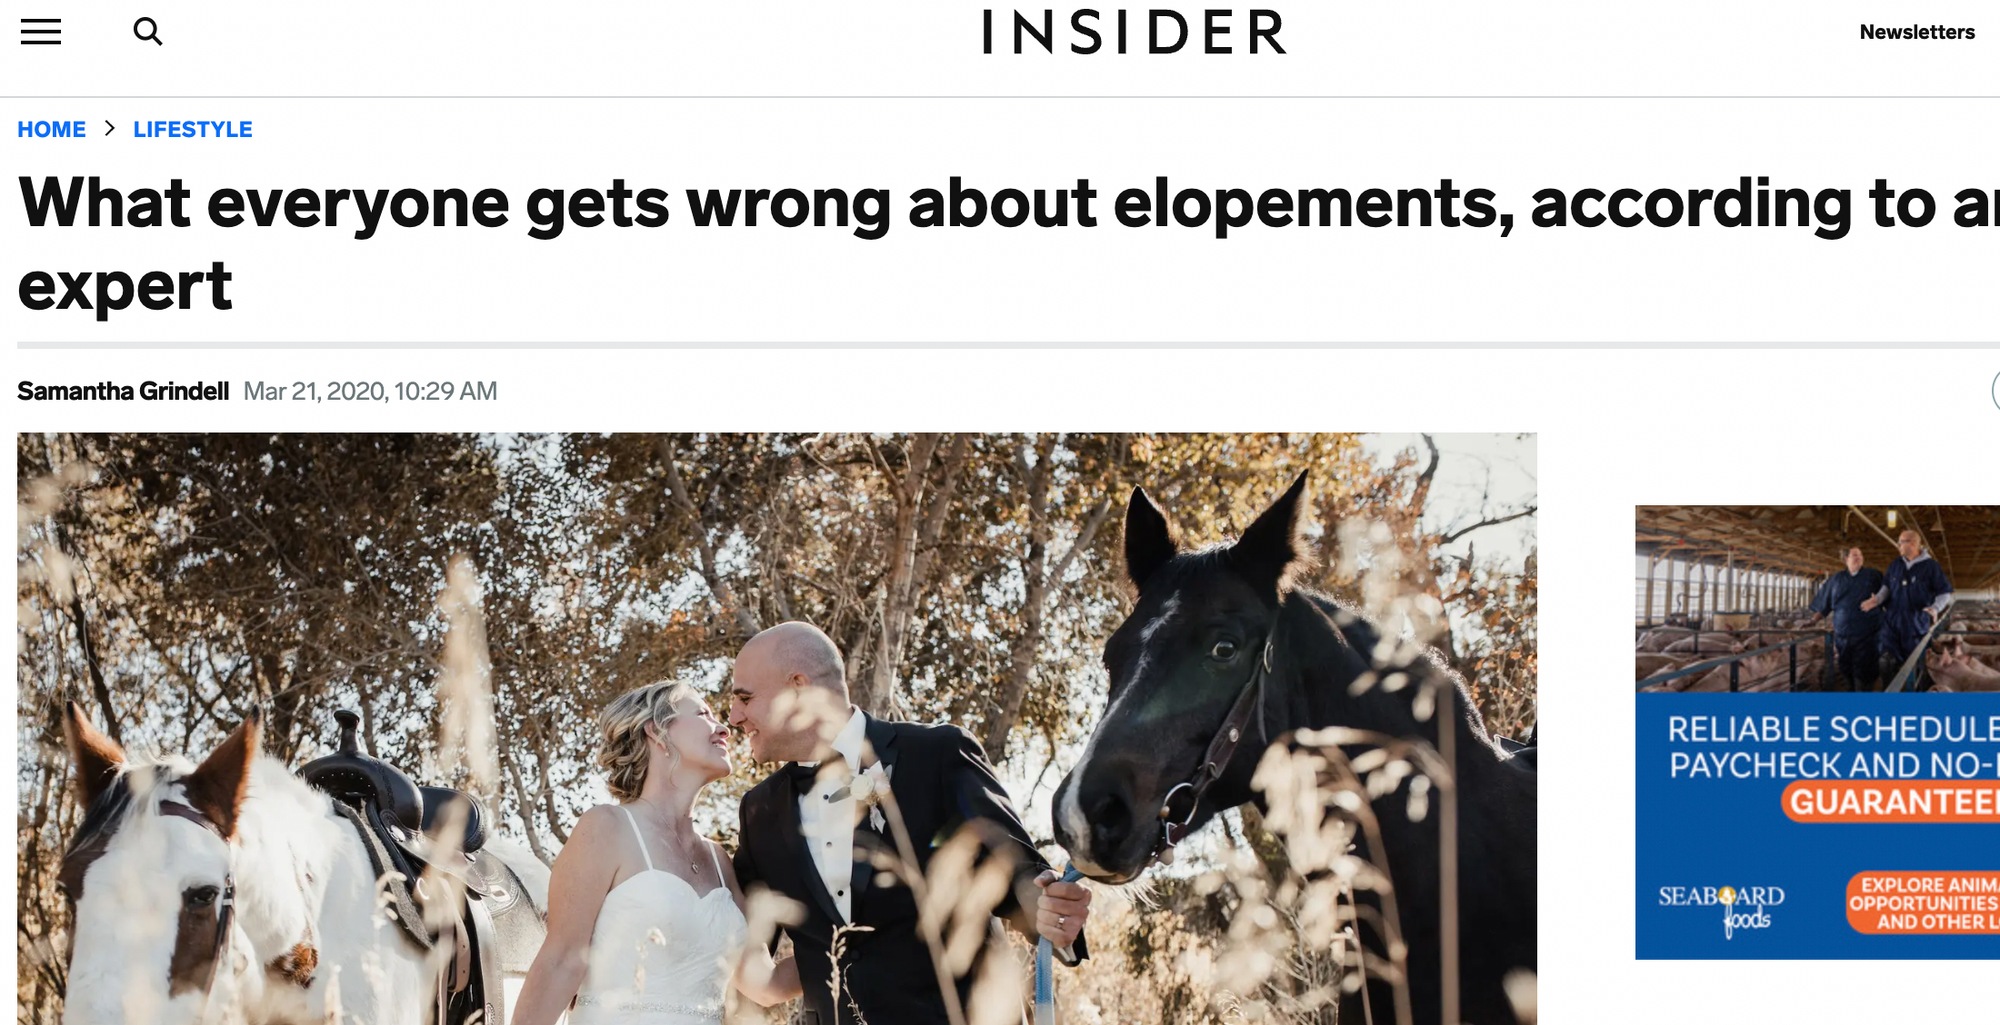 Coverage from Business Insider helped change the conversation around elopements